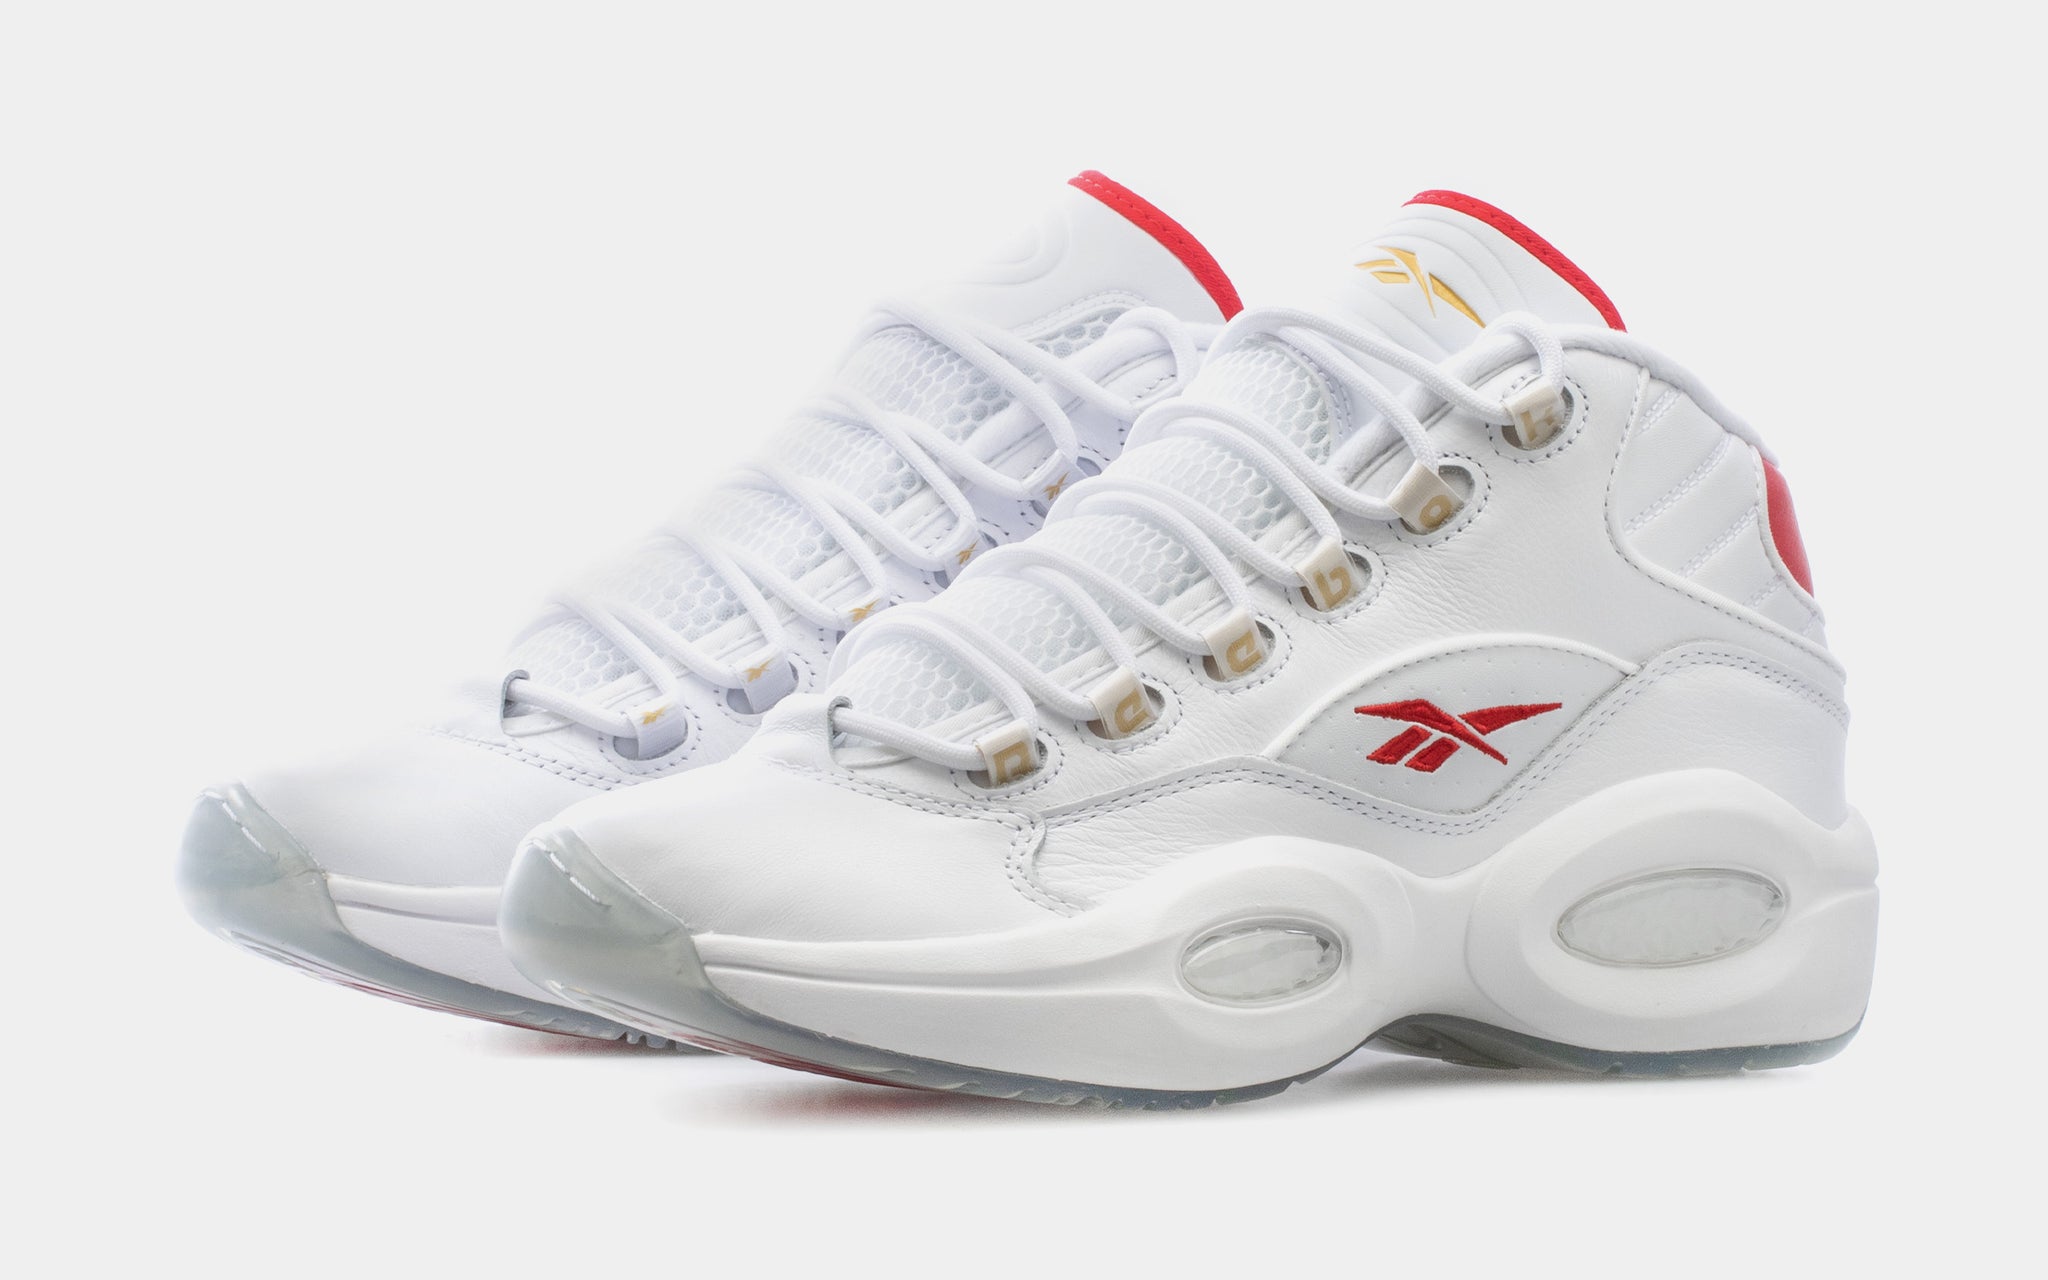 REEBOK QUESTION MID IVERSON UNITED BY BASKET-BALL - SELECTA BISSO